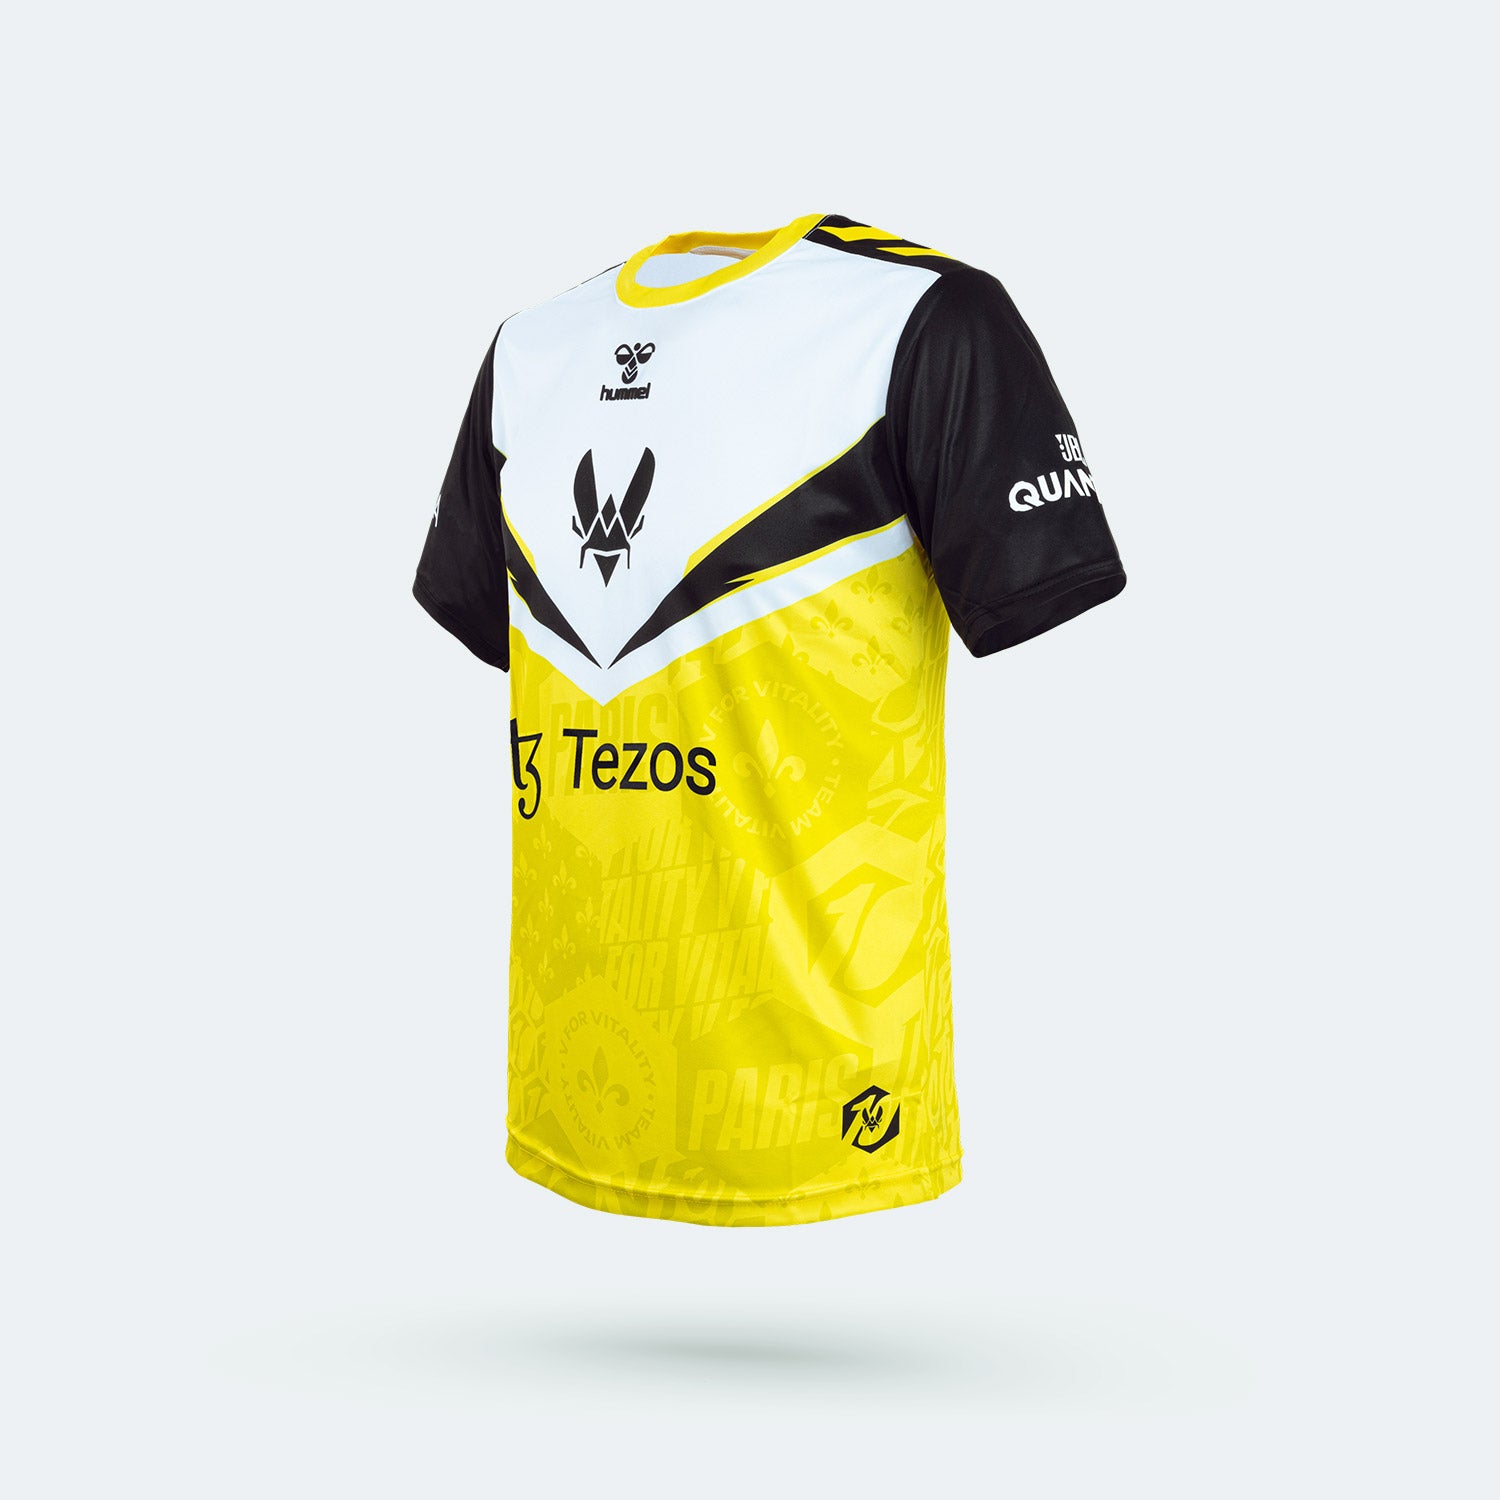 Bren Esports Black and Yellow custom Jersey - The Gaming Wear